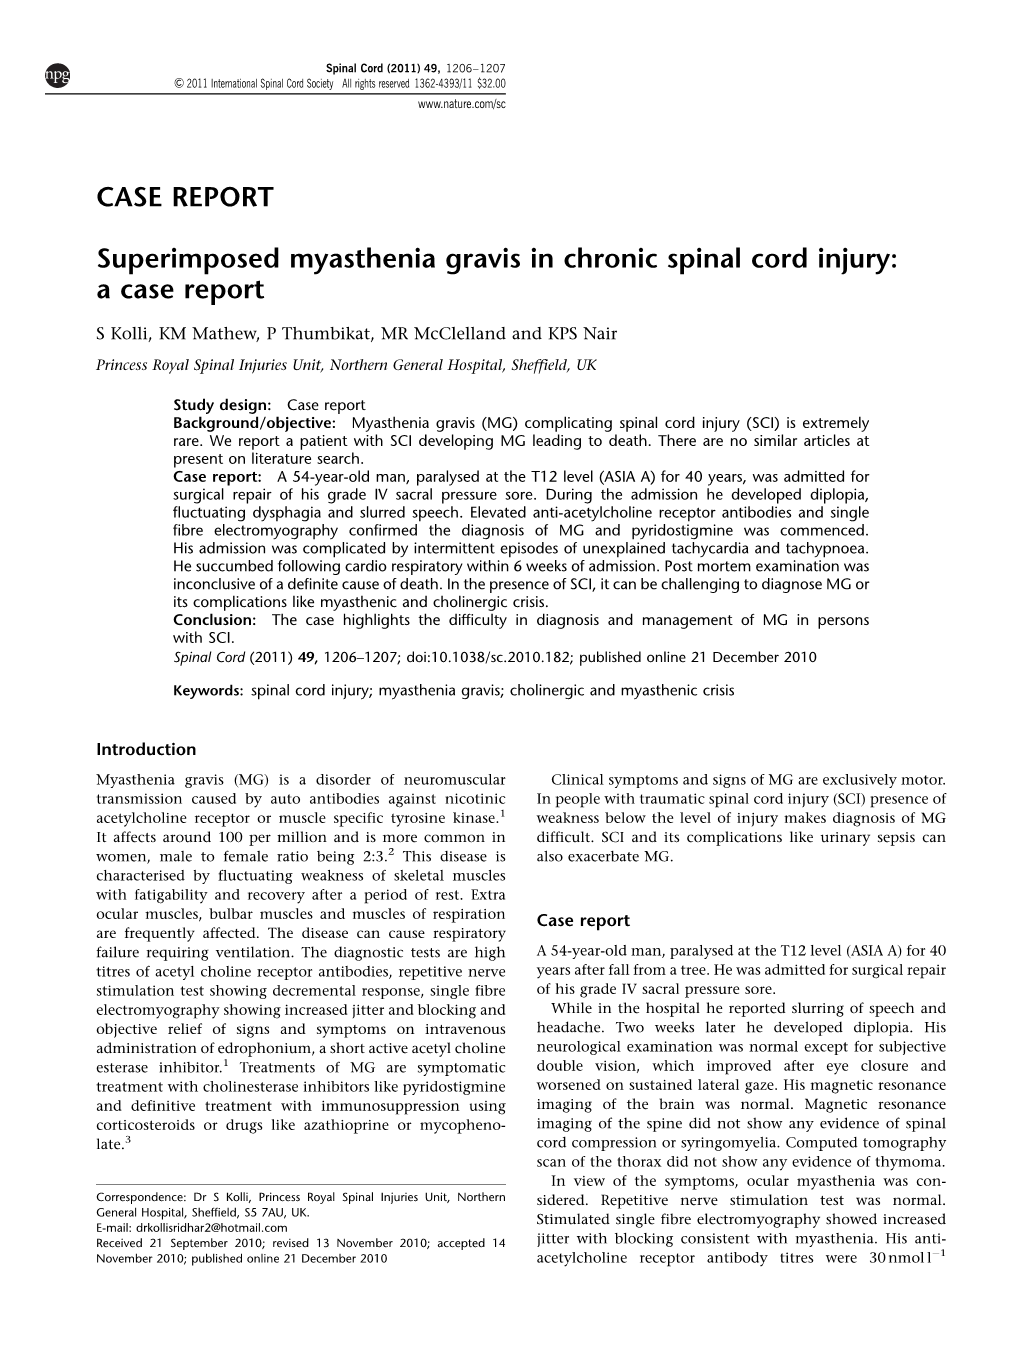 Superimposed Myasthenia Gravis in Chronic Spinal Cord Injury: a Case Report